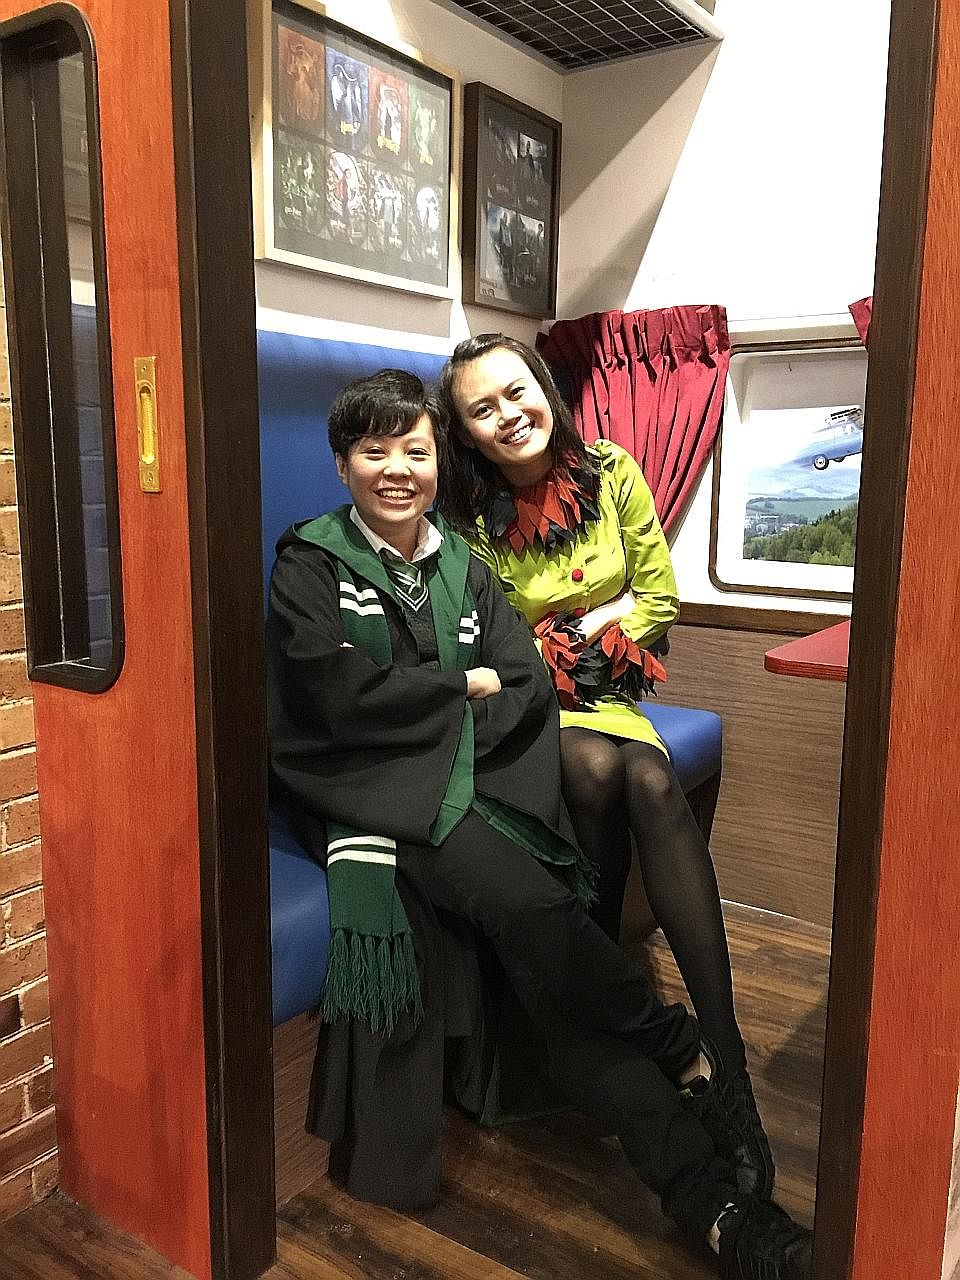 Ms Chin Xuan (far left), in a Slytherin school uniform, and Ms Jo Chua, wearing a Rita Skeeter outfit she made herself. The ardent Harry Potter fans are sitting in a Hogwarts Express train carriage at the Singapore Philatelic Museum’s Harry Potter exhibit